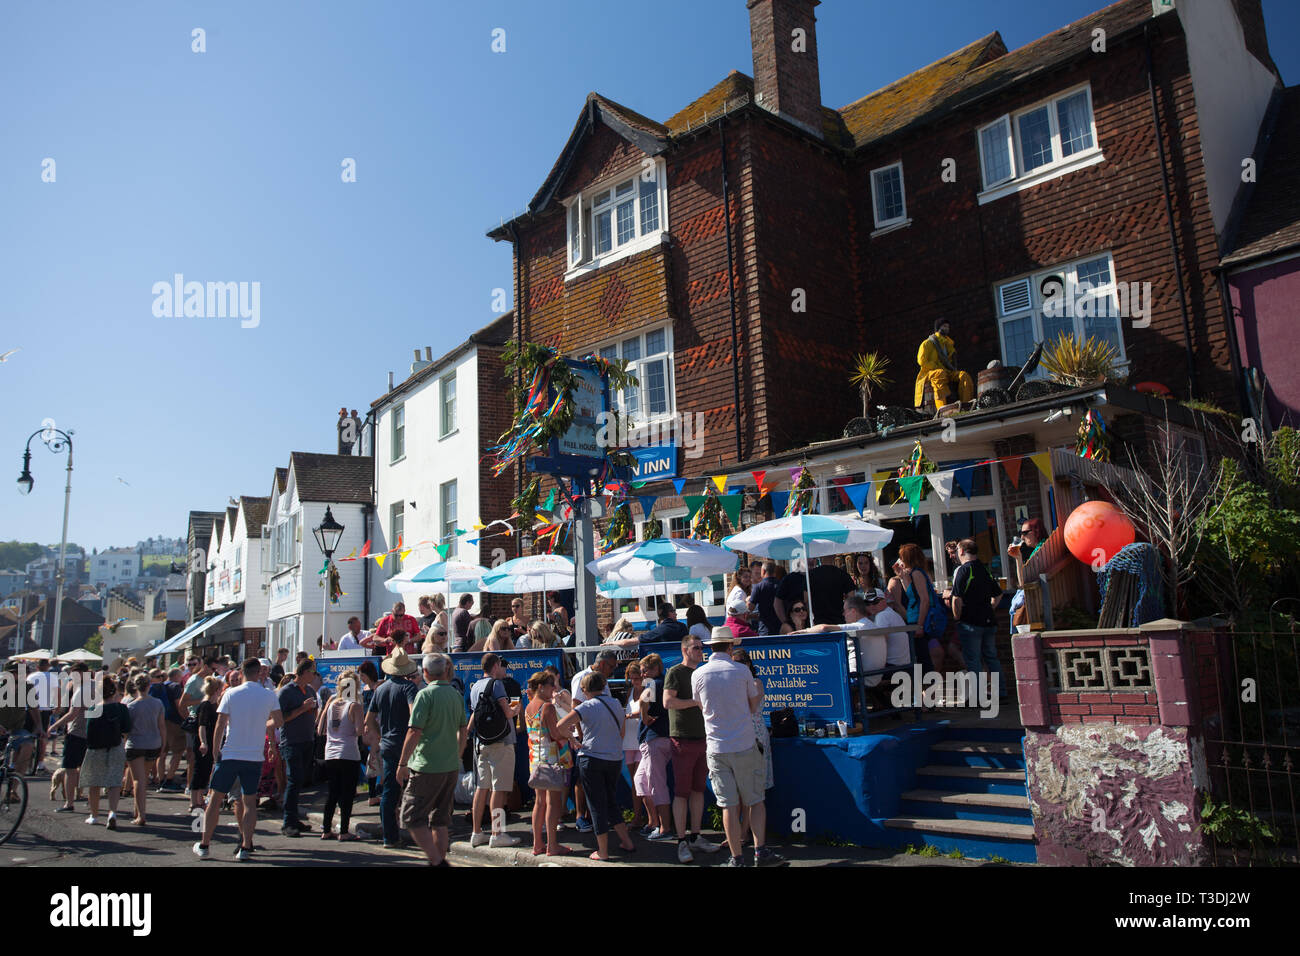 Revellers drinking outside the Dolphin Inn pub on a sunny day during Jack on the Green May Day Bank Holiday, Hastings, East Sussex, Uk Stock Photo